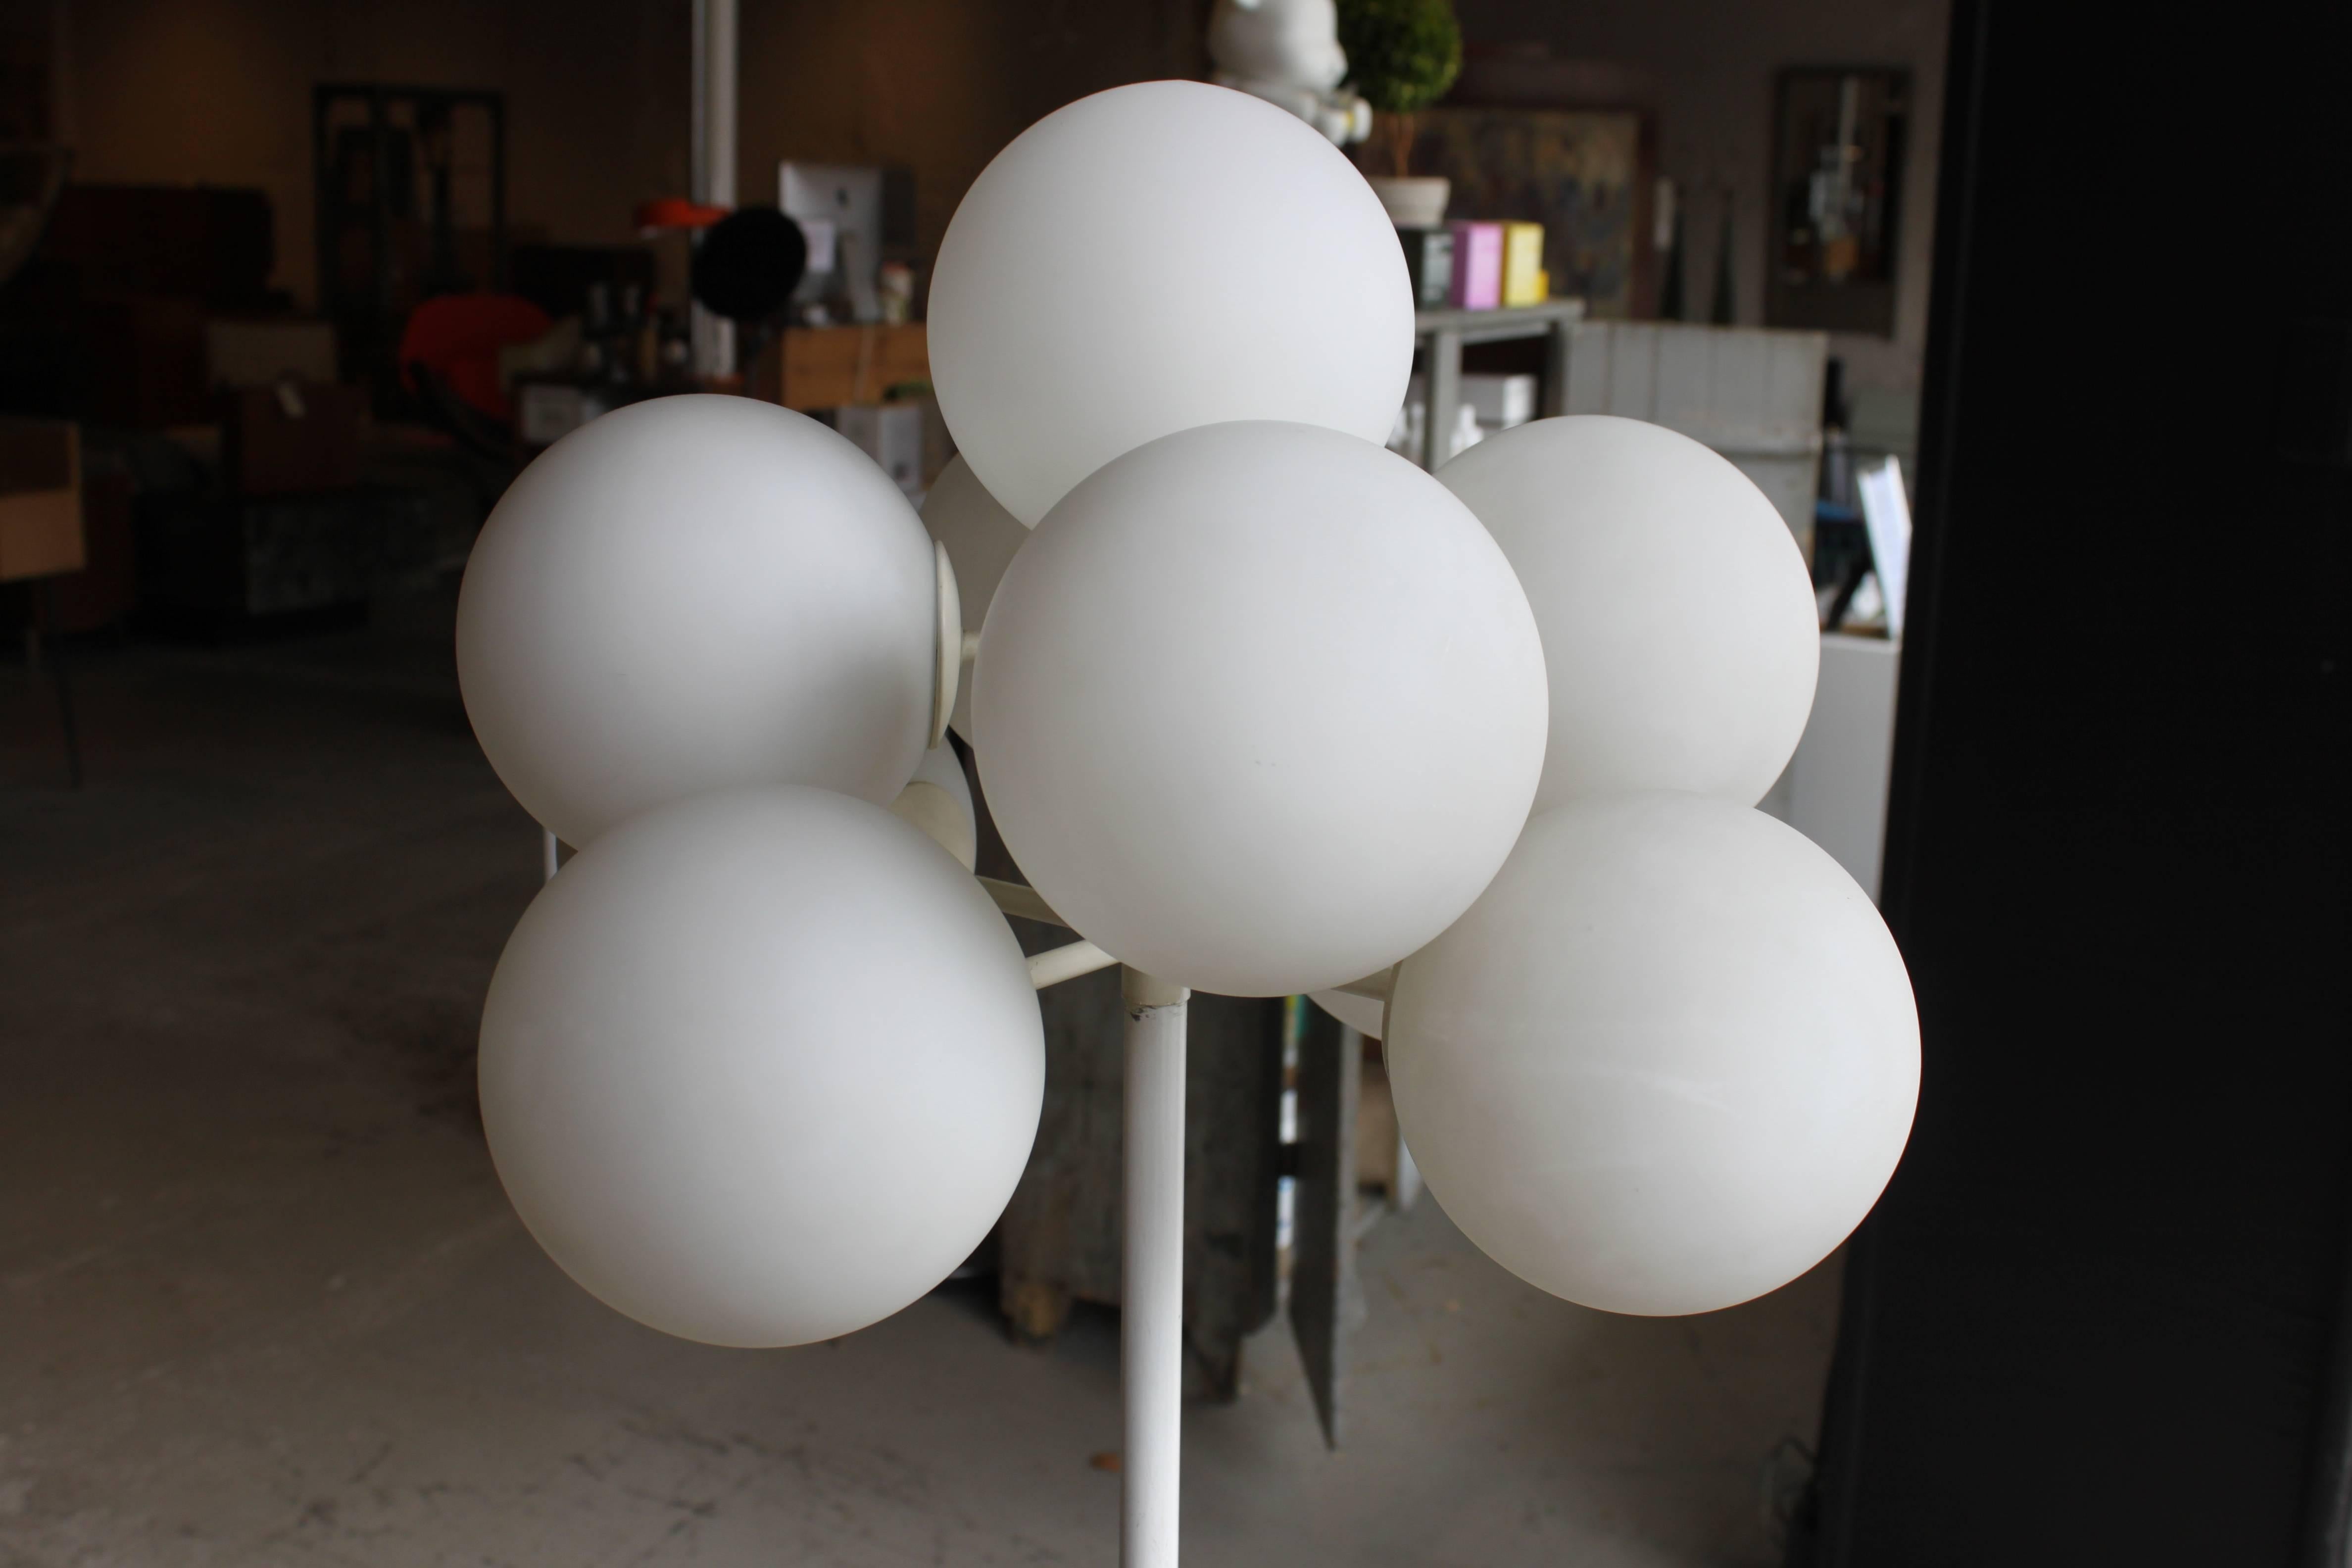 Vintage Swiss floor lamp designed by Max Bill. There are nine frosted glass globes. Condition appropriate with age and use.